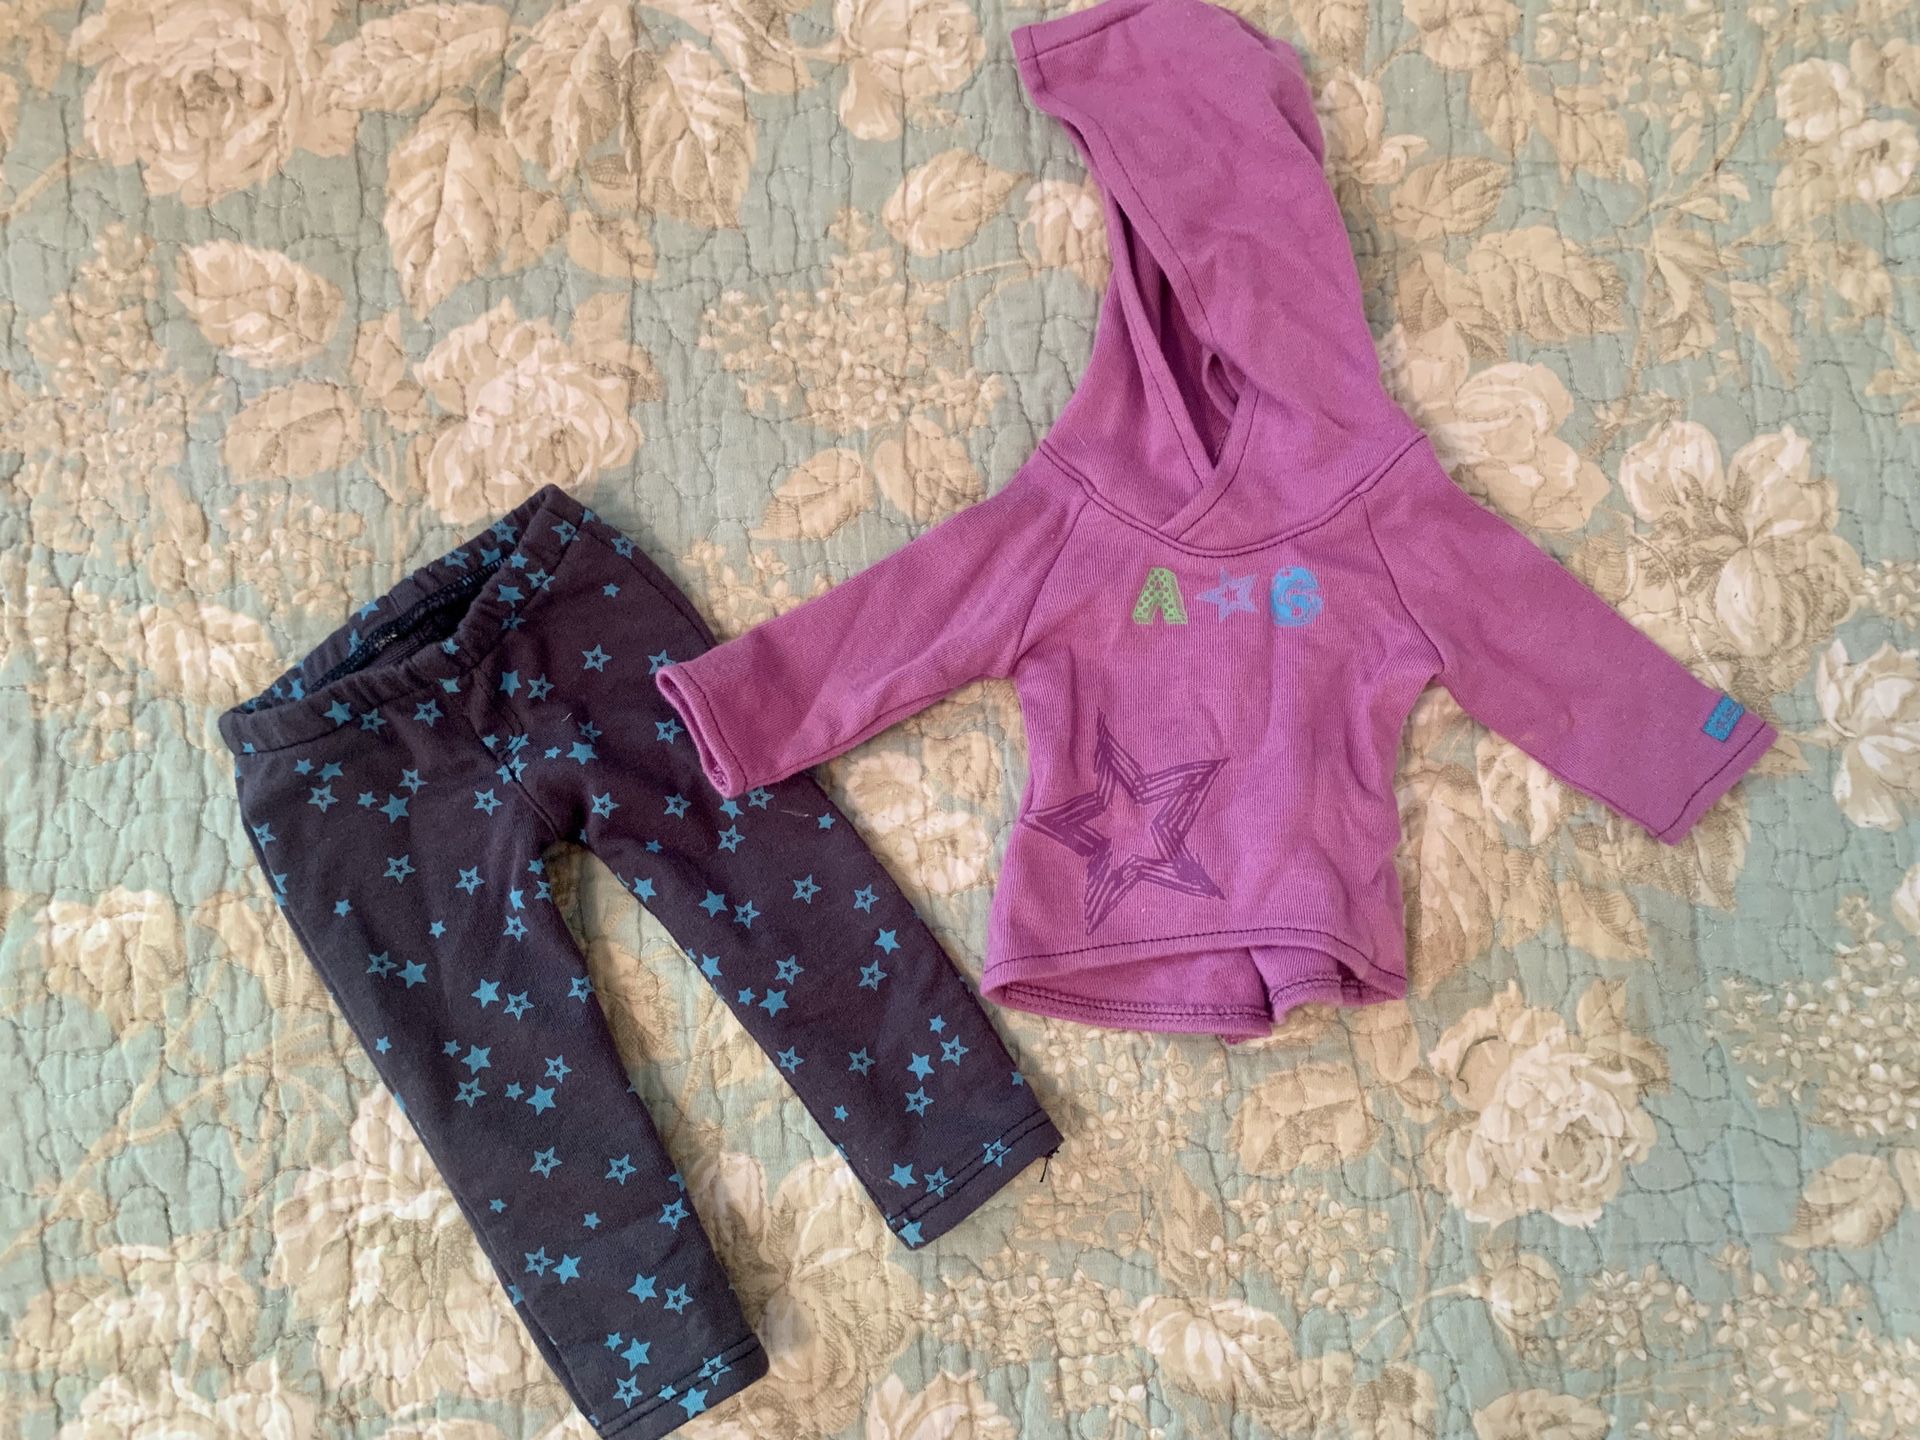 American Girl Doll “Starry Hoodie” Outfit